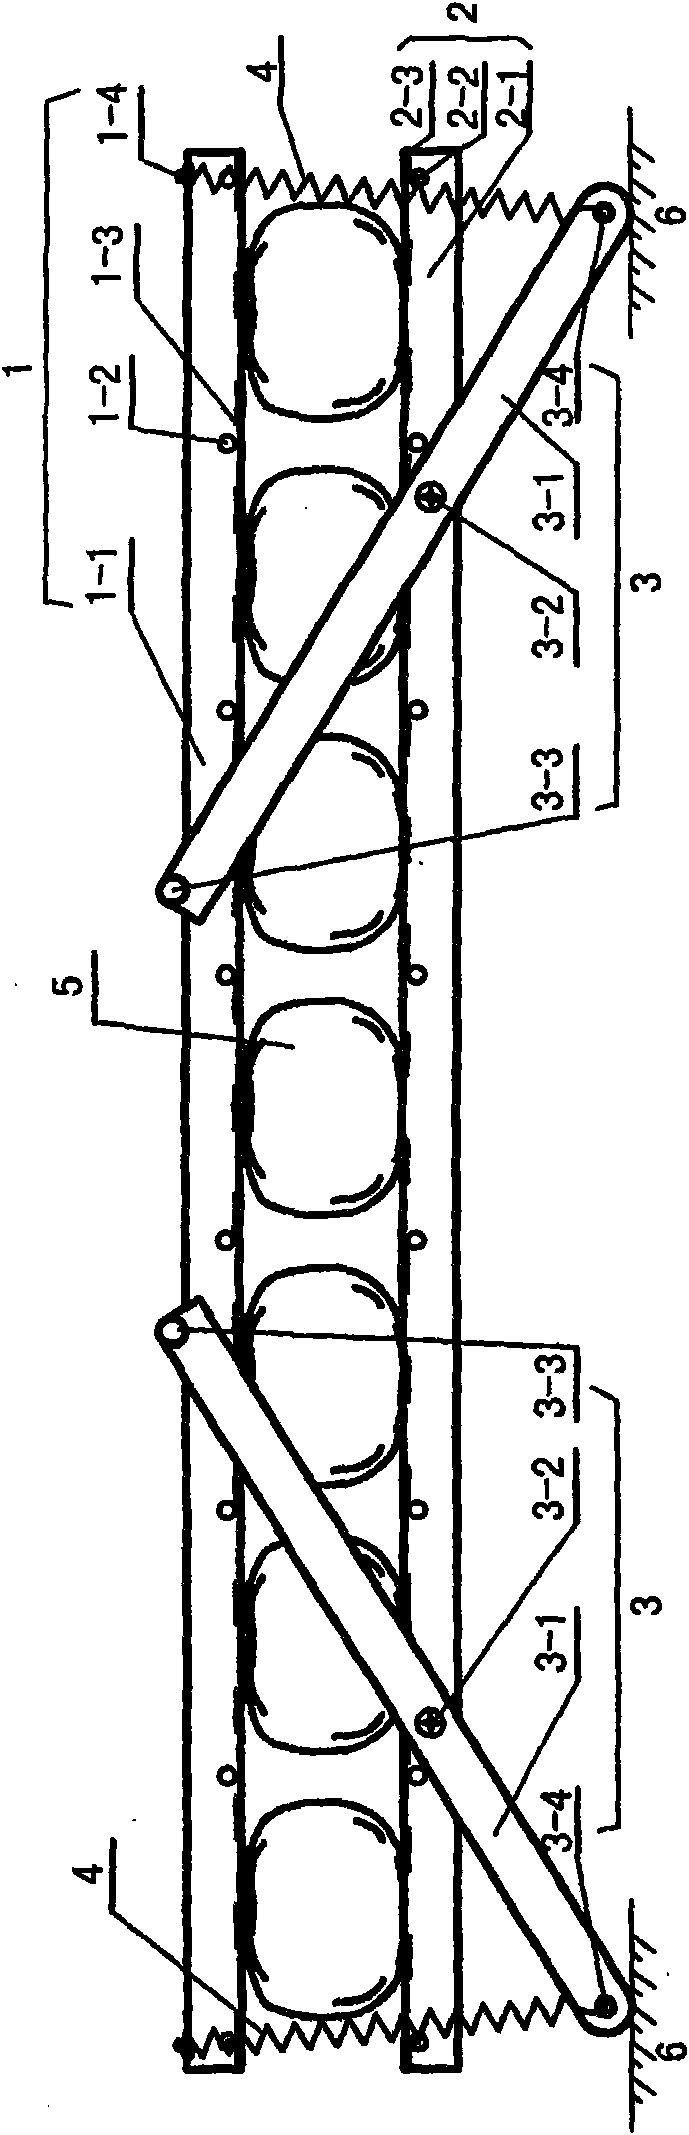 Vibration production method for dried persimmons with clamp and clamp thereof